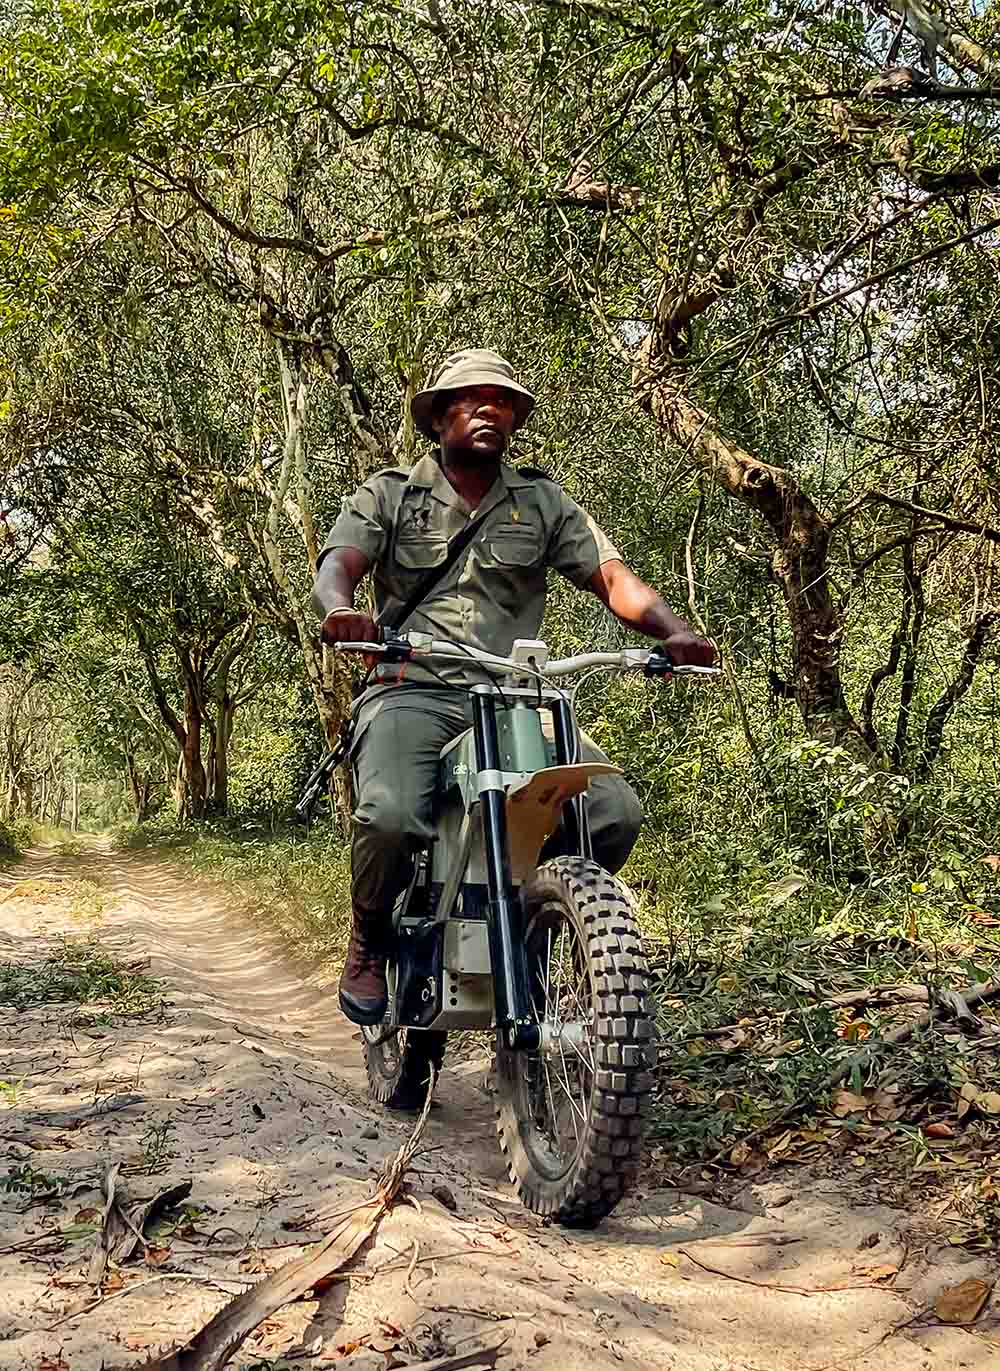 It is hoped that the anti-poaching initiative will help develop longer-lasting, more durable motorcycles for everyday uses